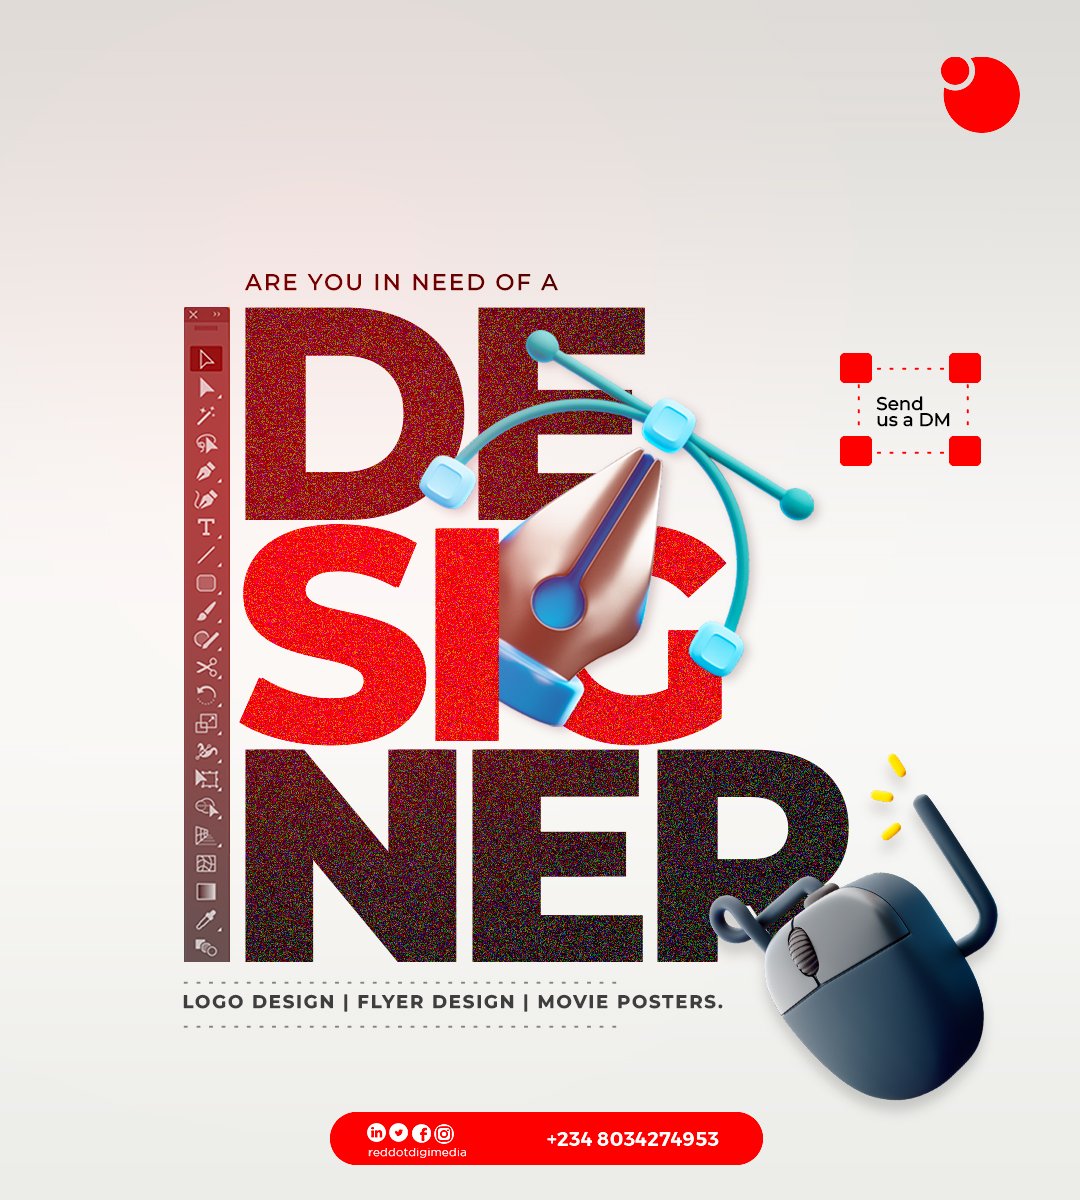 Does your brand need a designer? Would you like your thoughts well interpreted in design form? We at @reddotdigimedia have the best hands to create stunning designs for your brand. #flyerdesigns #bannerdesign #posterdesigns & more! Send us a DM now! #portable #nigerstate